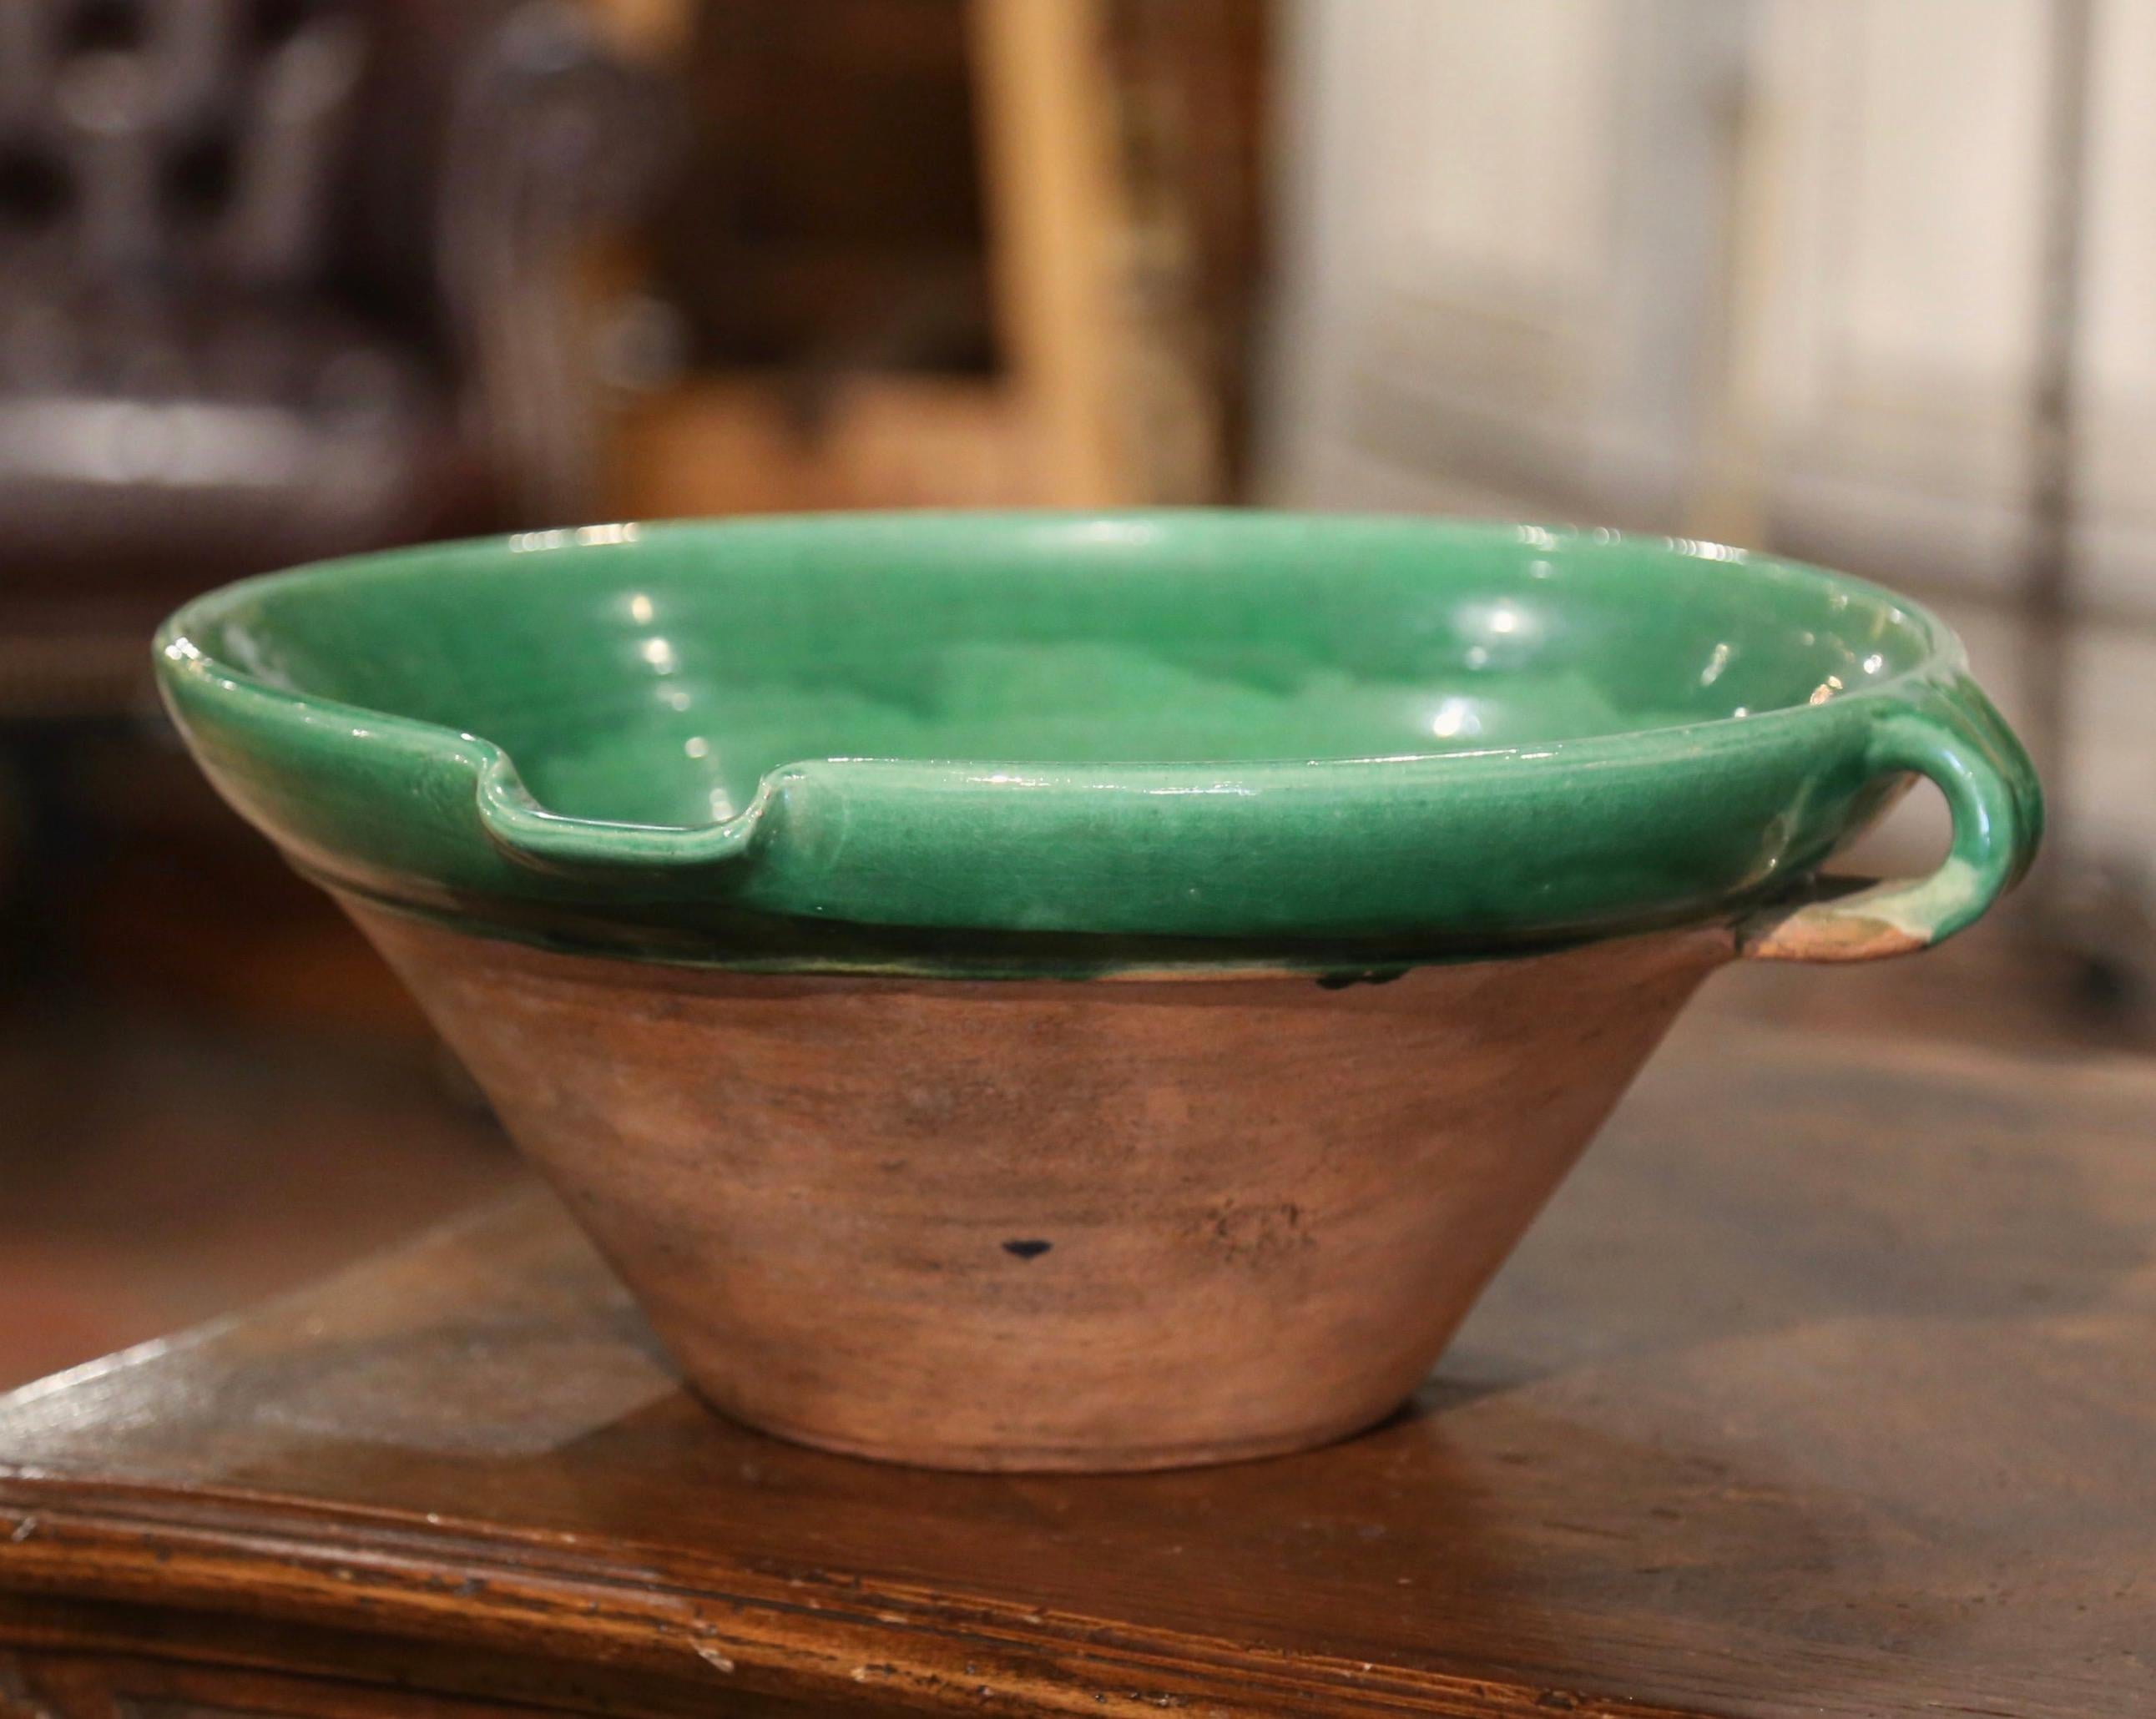 This elegant antique Tian (Provencal term for bowl) was crafted in Provence, France, circa 1970; the round handmade terracotta bowl features two small handles, a server beak, and has a subtle green glaze on the inside with natural earthenware finish